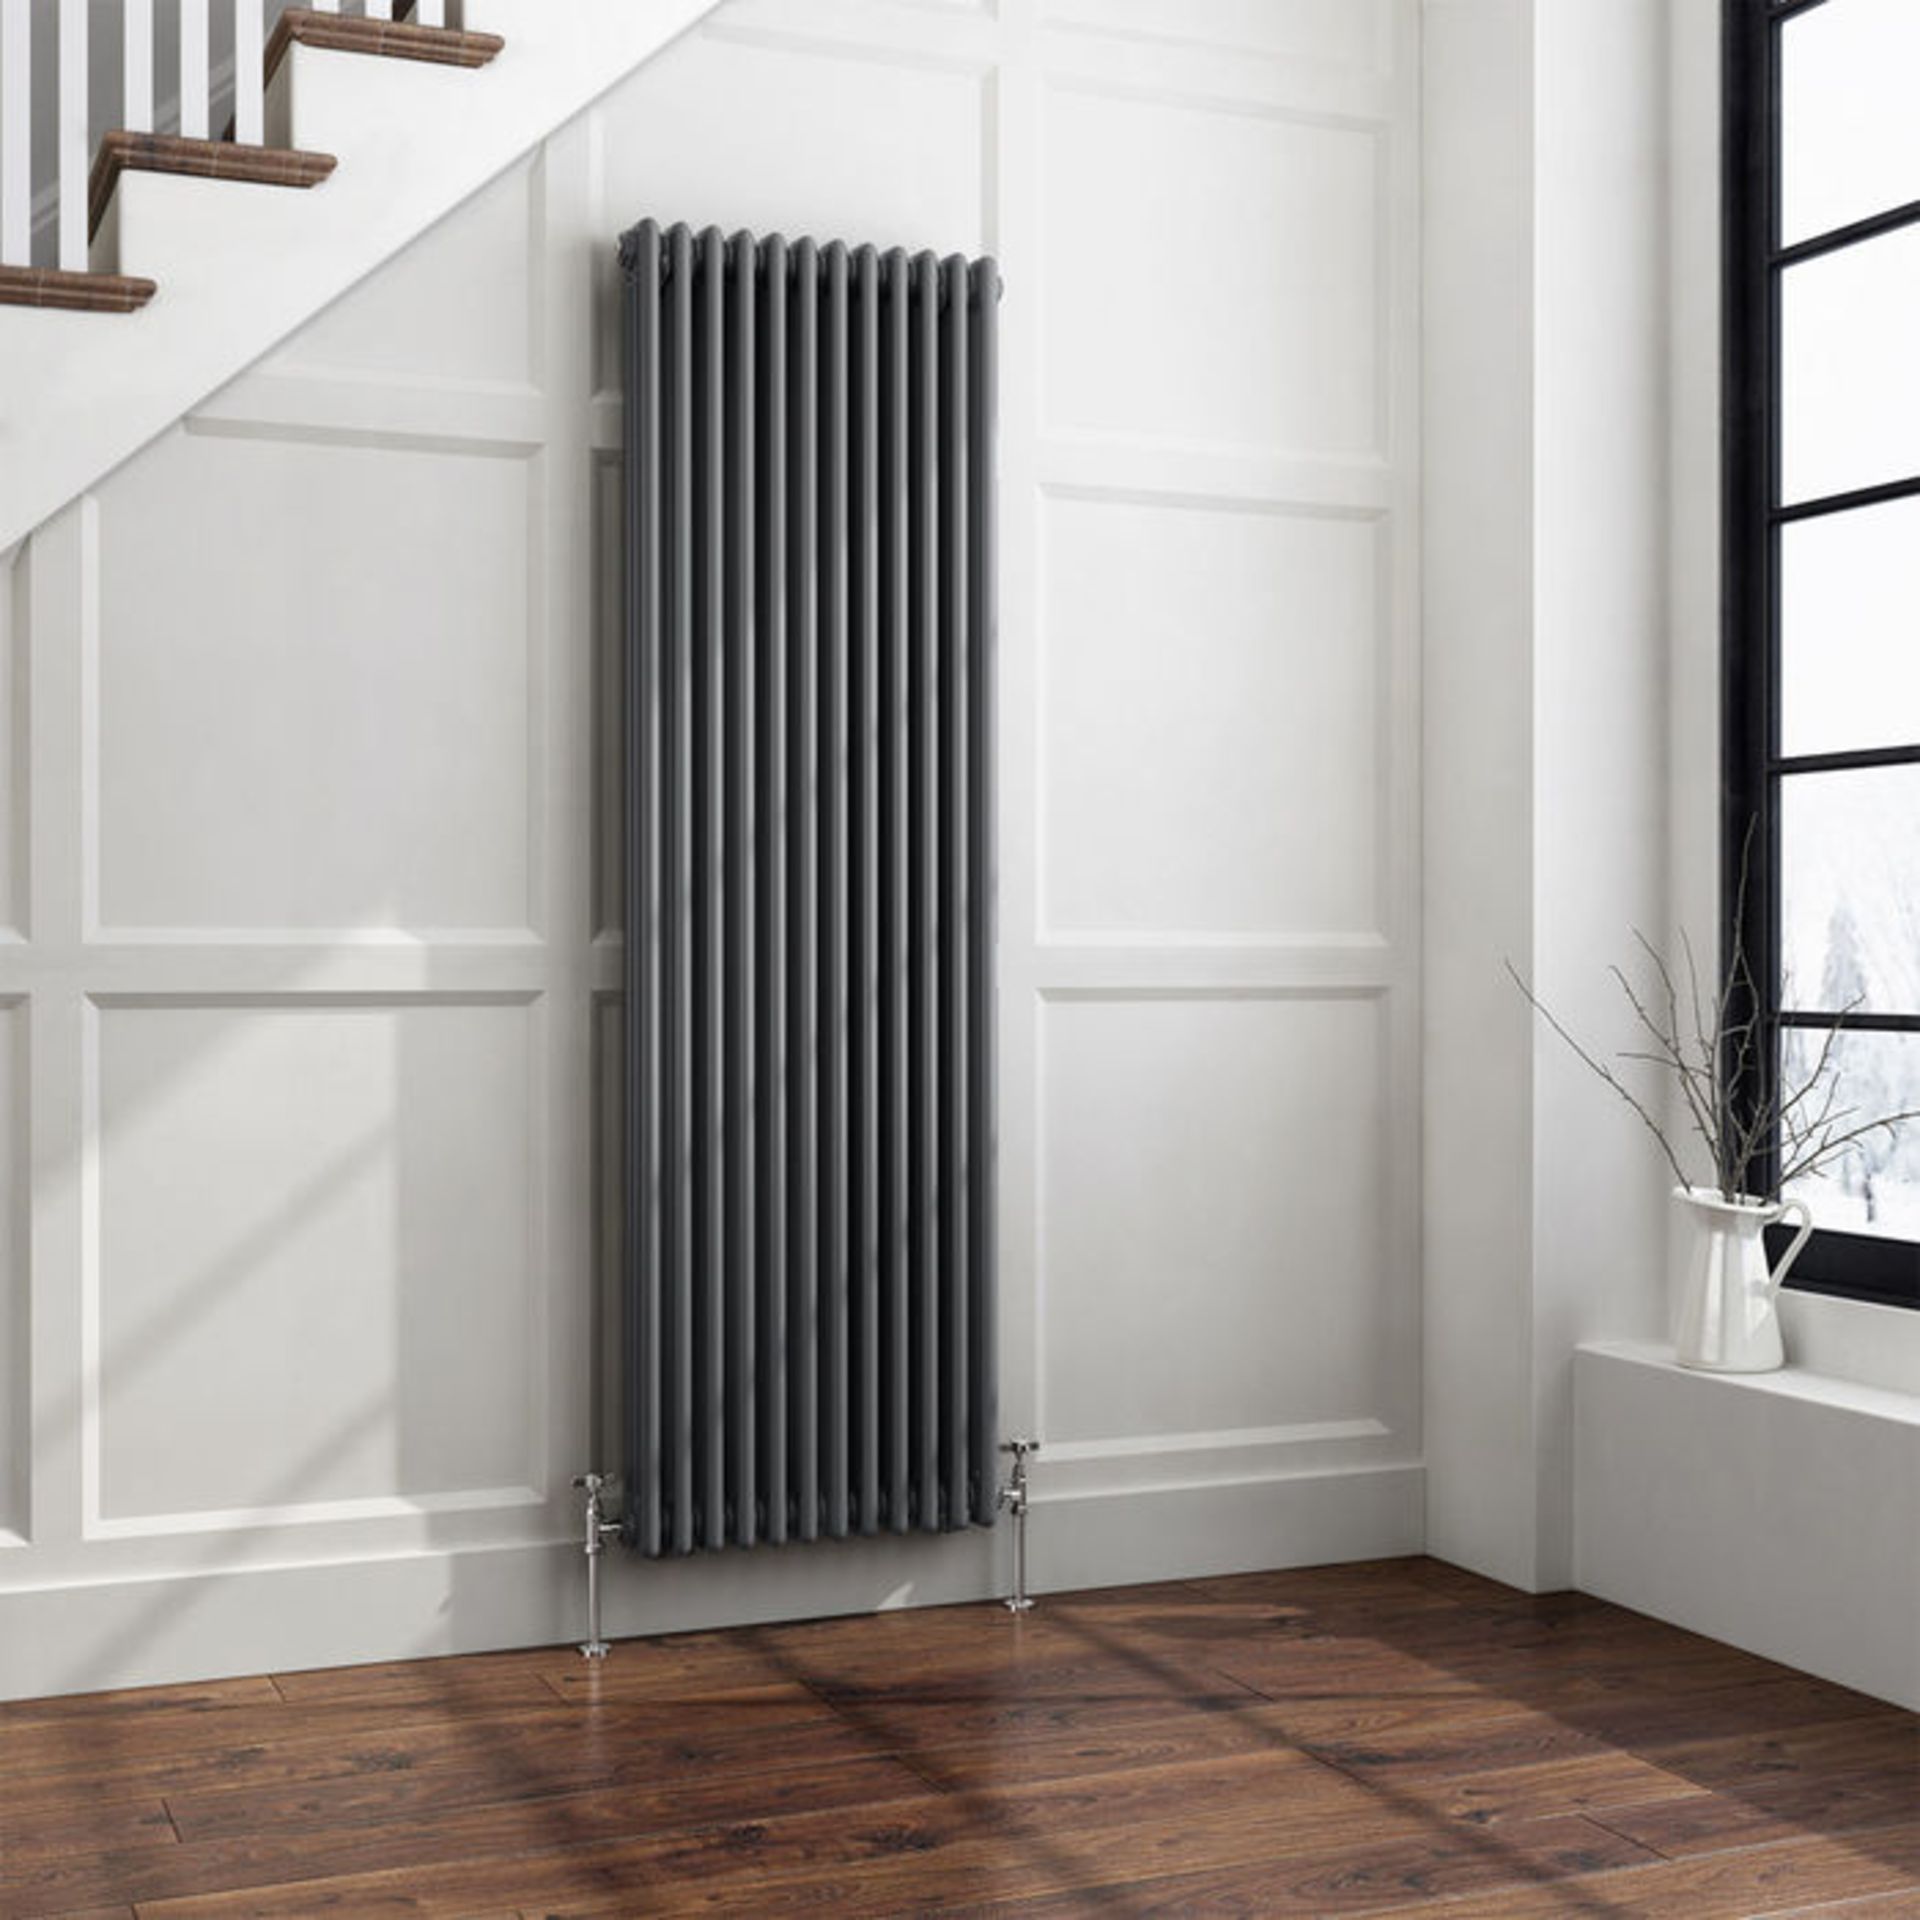 (ED63) 1800x558mm Anthracite Triple Panel Vertical Colosseum Traditional Radiator. RRP £619.99. Made - Image 3 of 4